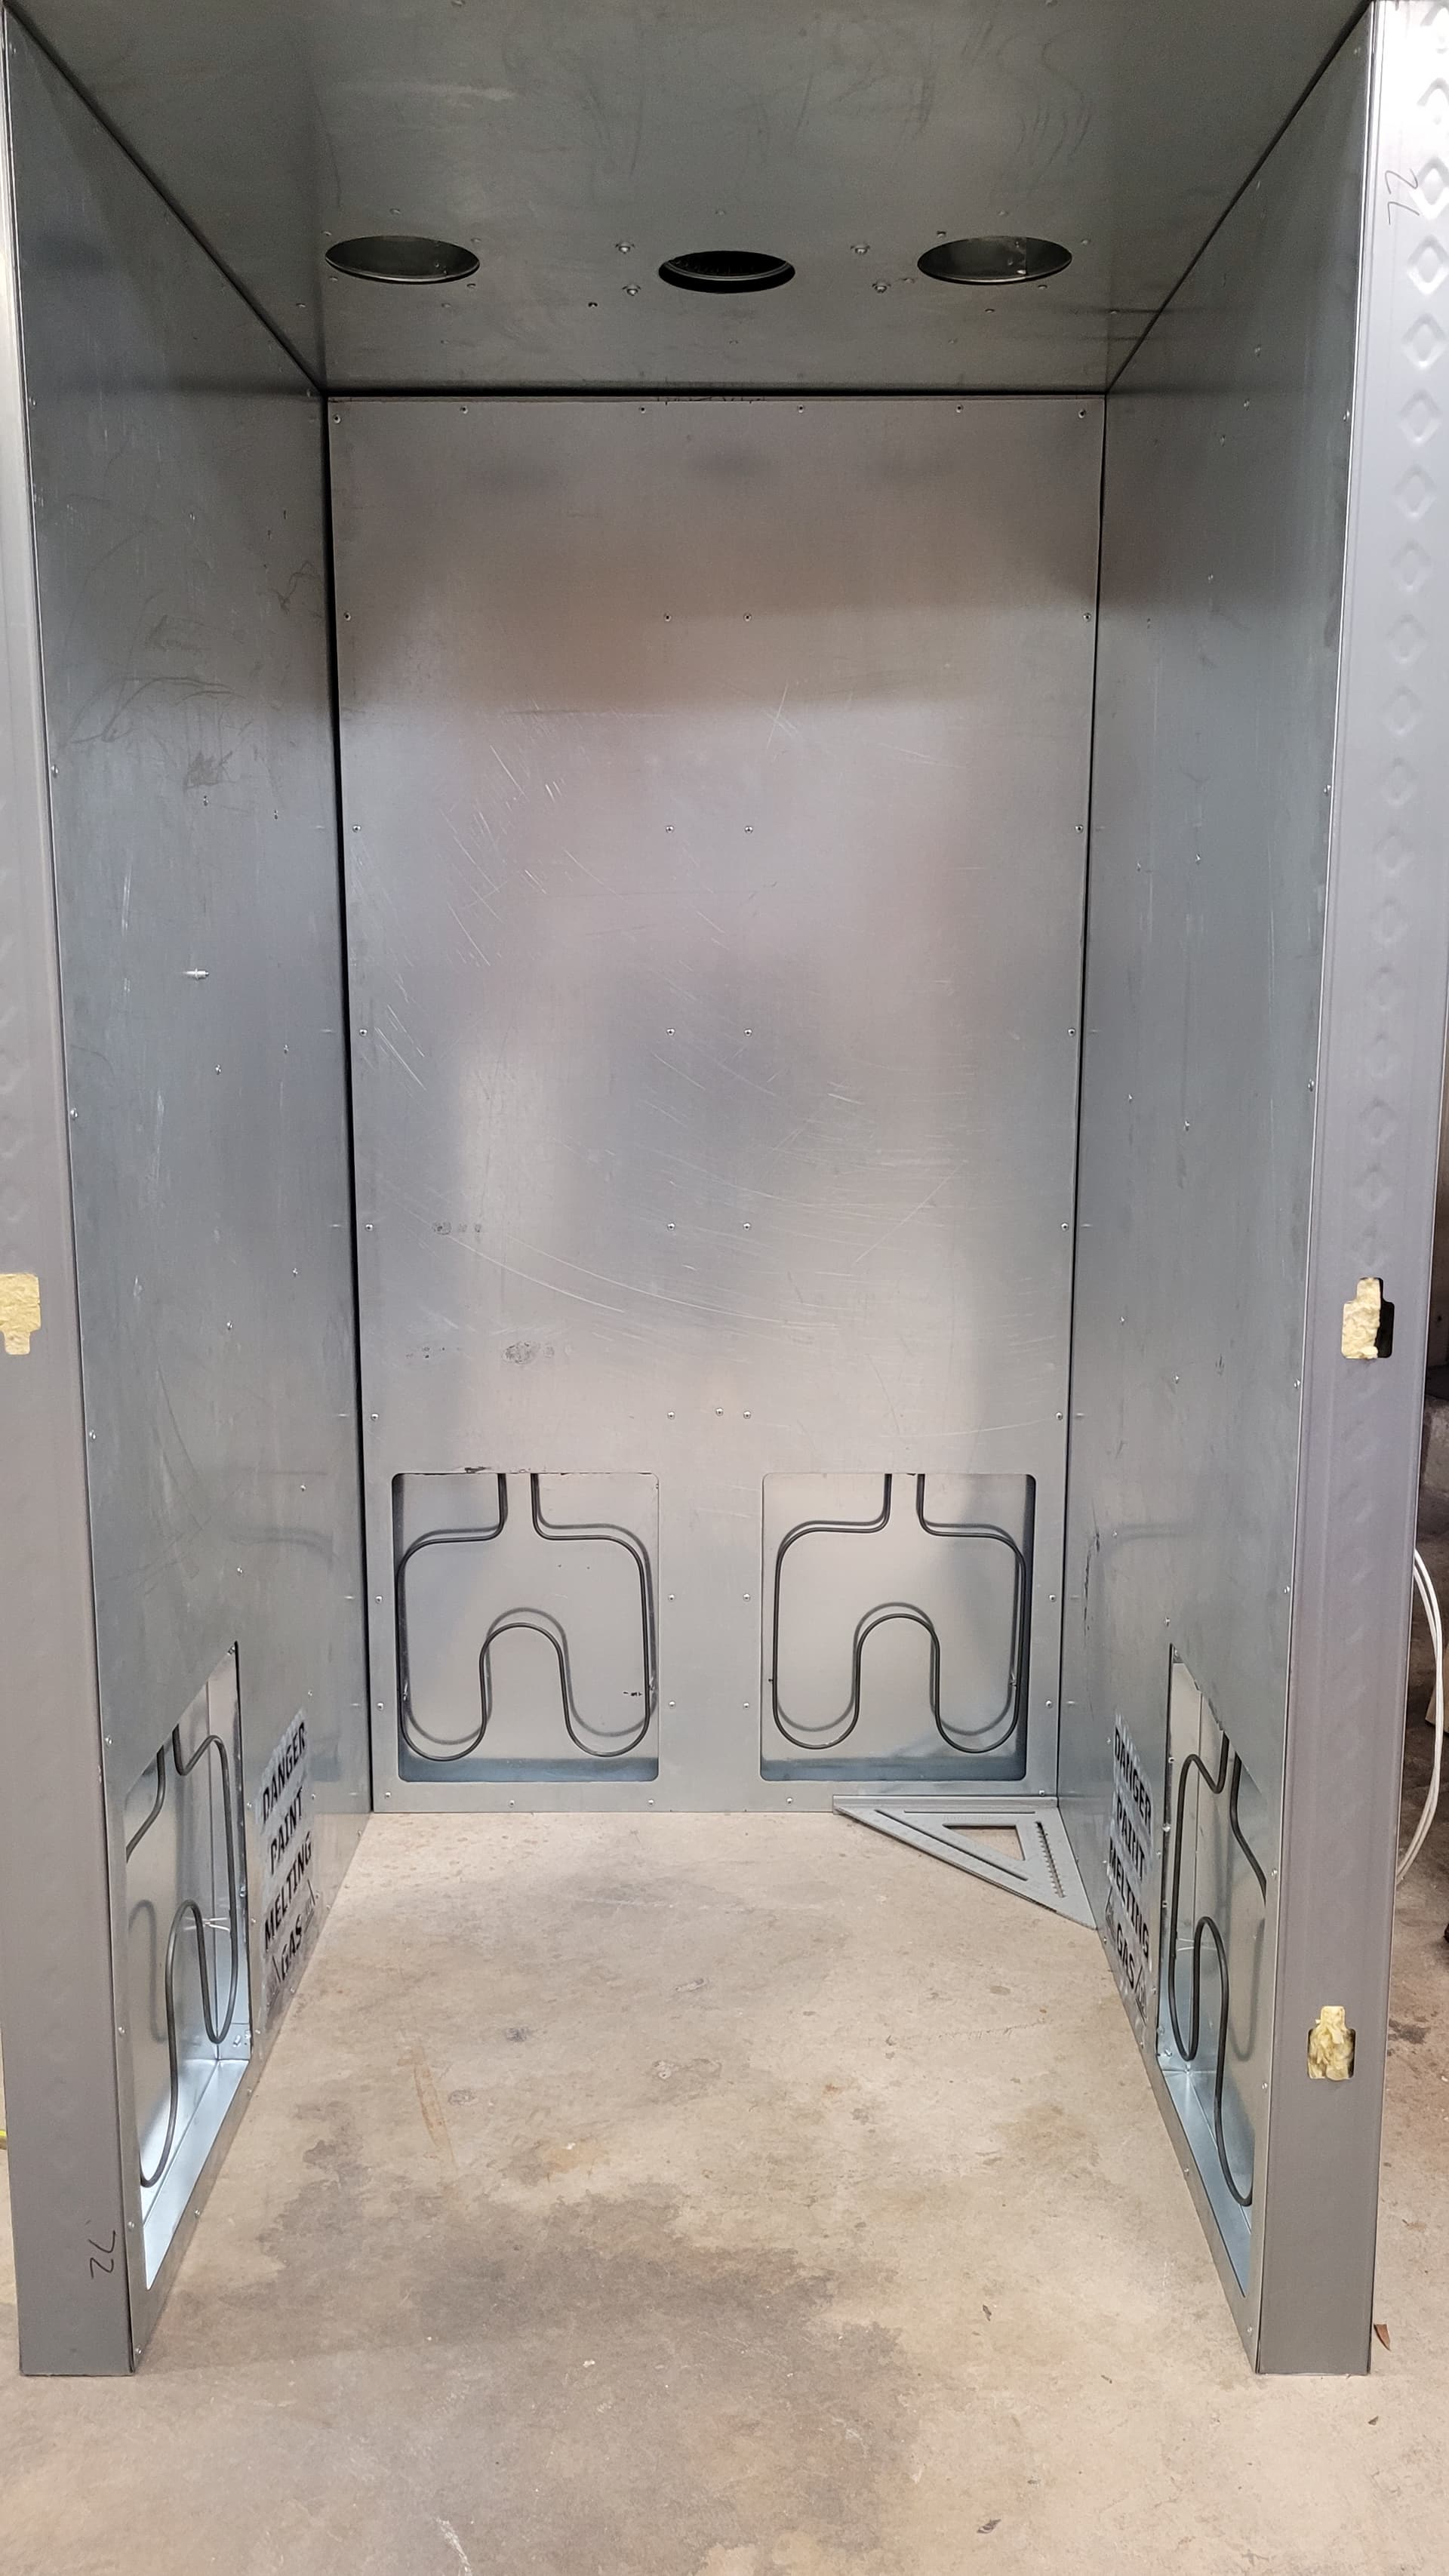 Powder Coating Oven DIY Build (How To Make) 